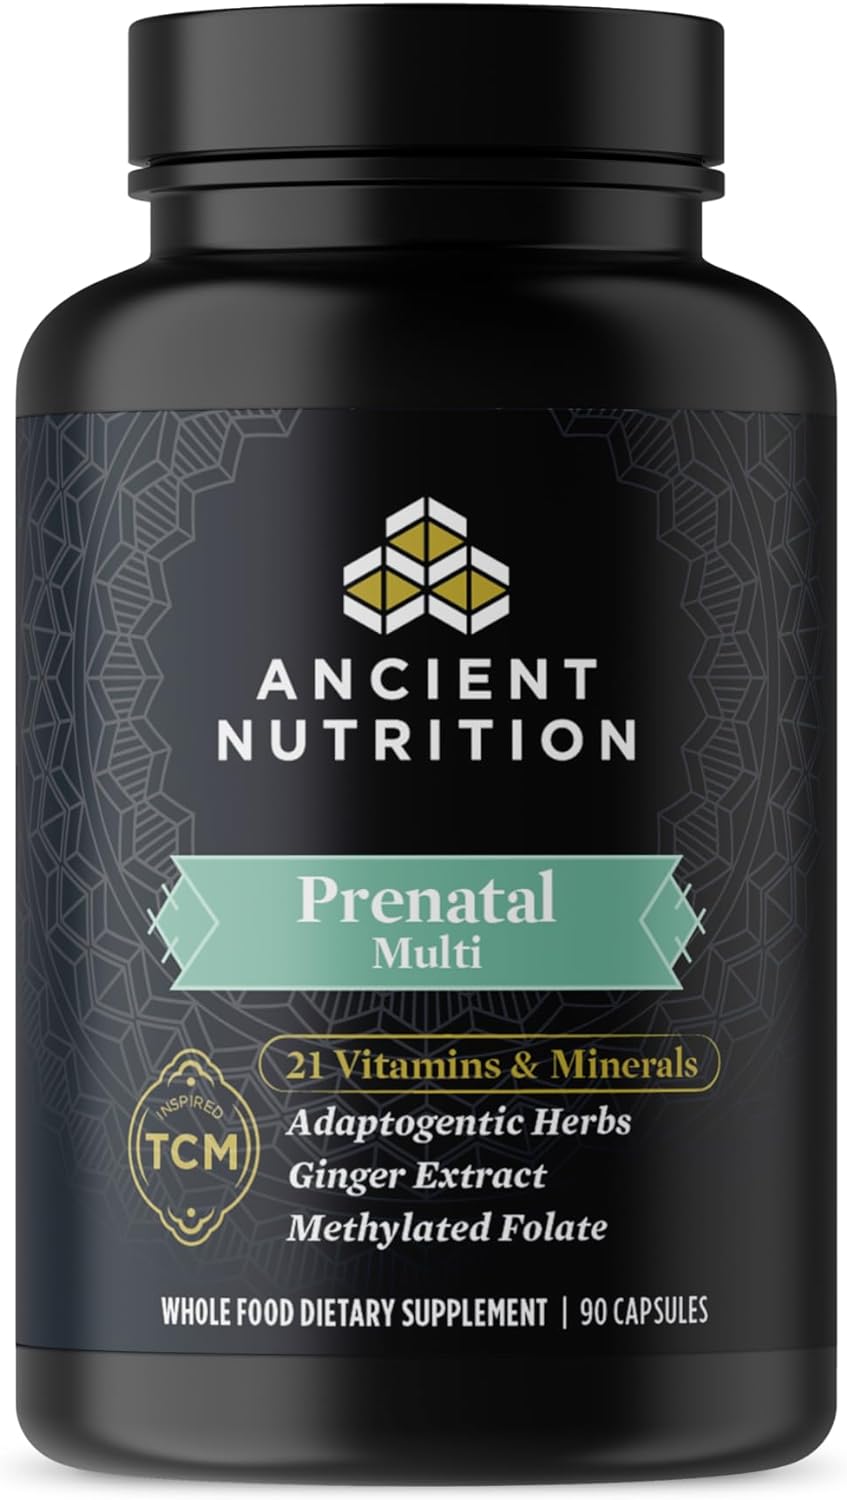 Ancient Nutrition Prenatal Vitamins, Multivitamin for Women with Vitamin C, Vitamin B12 and Folate, Supports Pregnancy and Fertility Health, Paleo and Keto Friendly, 90 Capsules